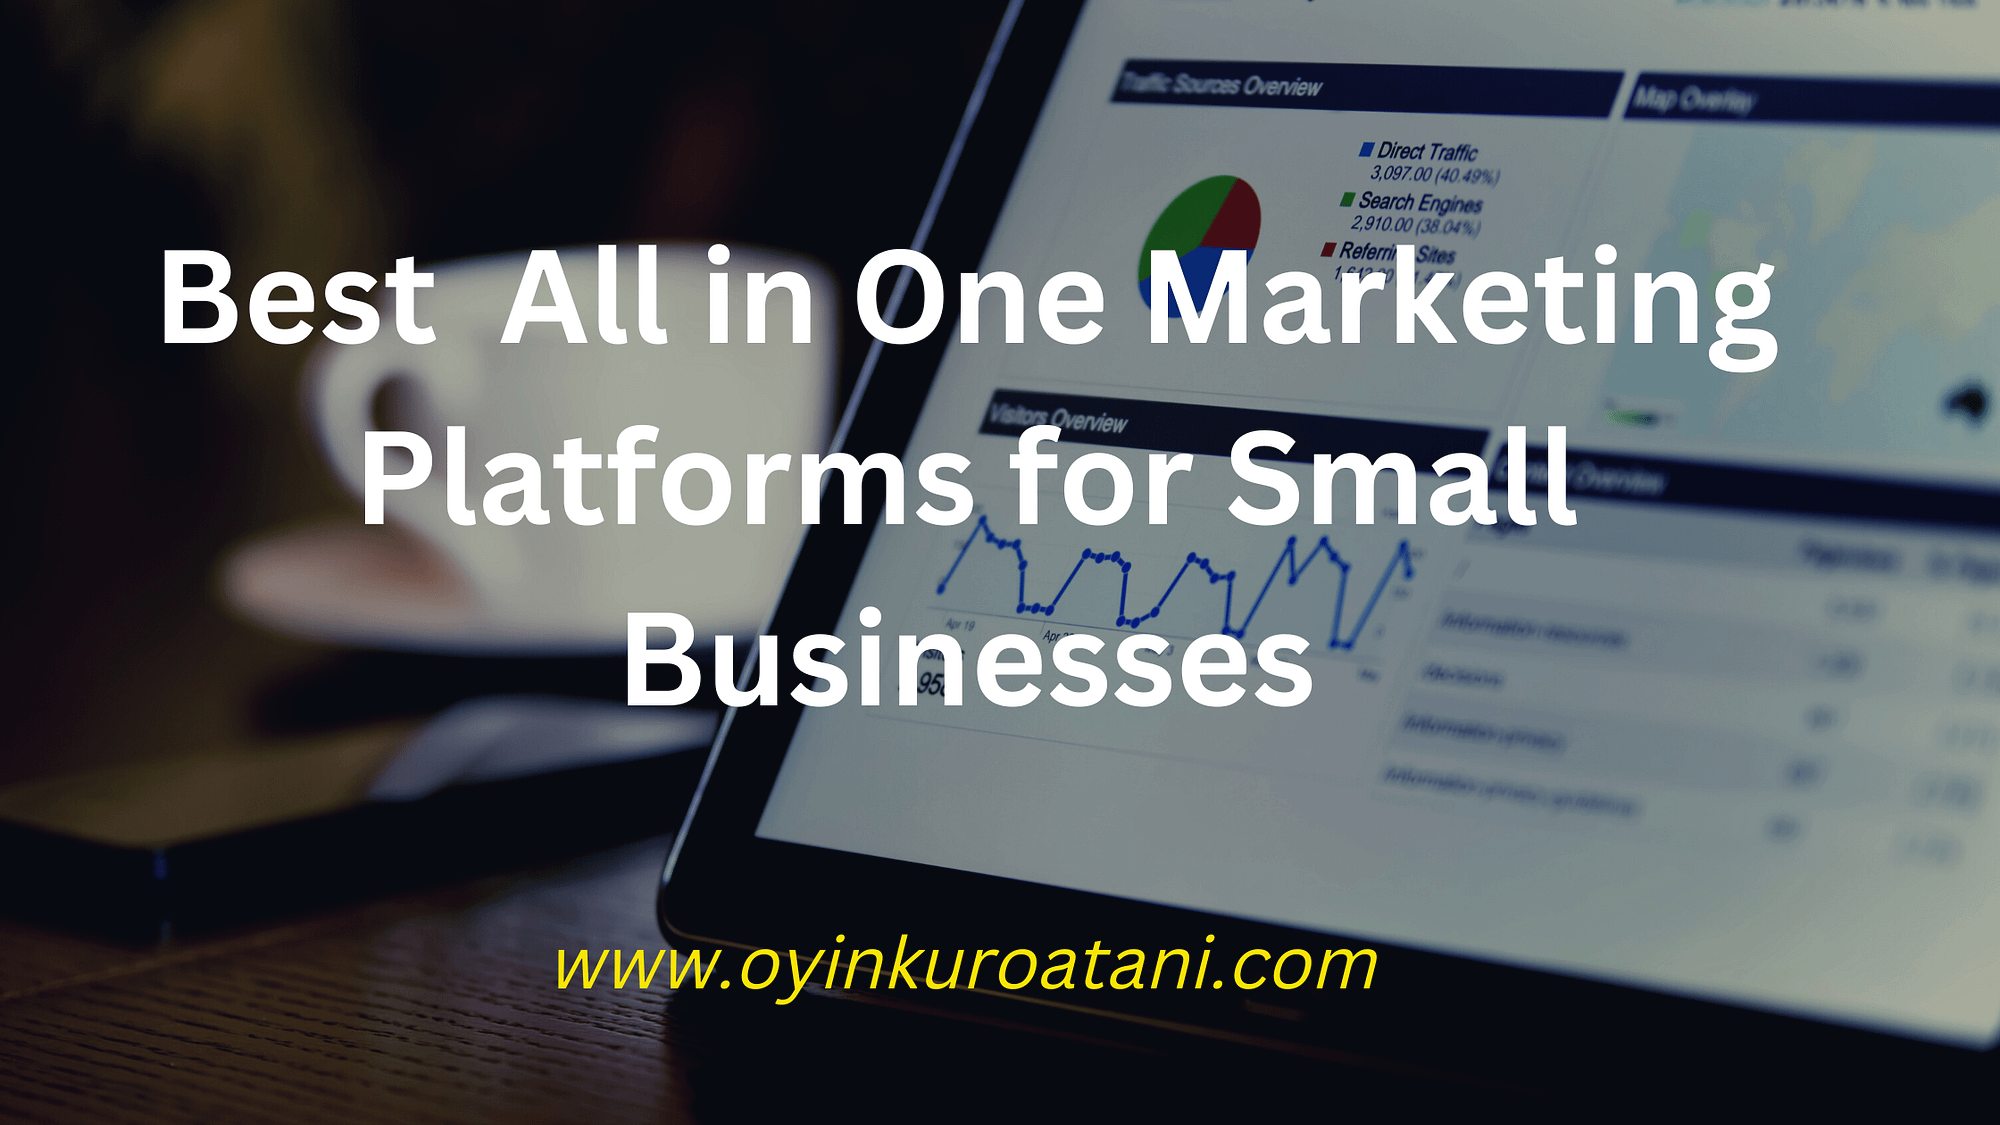 5 All In One Marketing Platforms